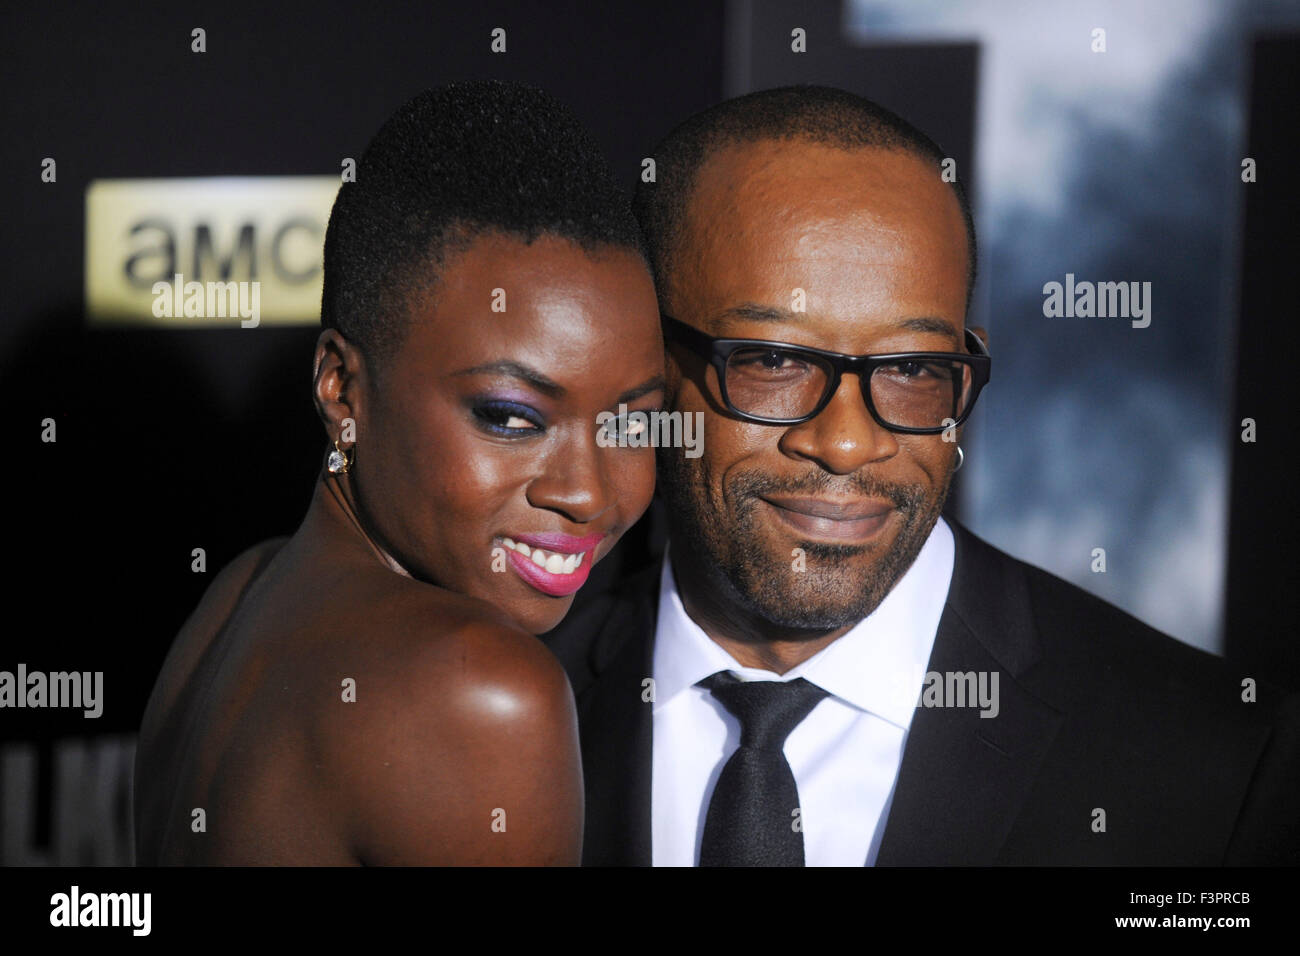 New York City. 9th Oct, 2015. Danai Gurira and Lennie James attend AMC's 'The Walking Dead' Season 6 Fan Premiere Event 2015 at Madison Square Garden on October 9, 2015 in New York City. © dpa/Alamy Live News Stock Photo